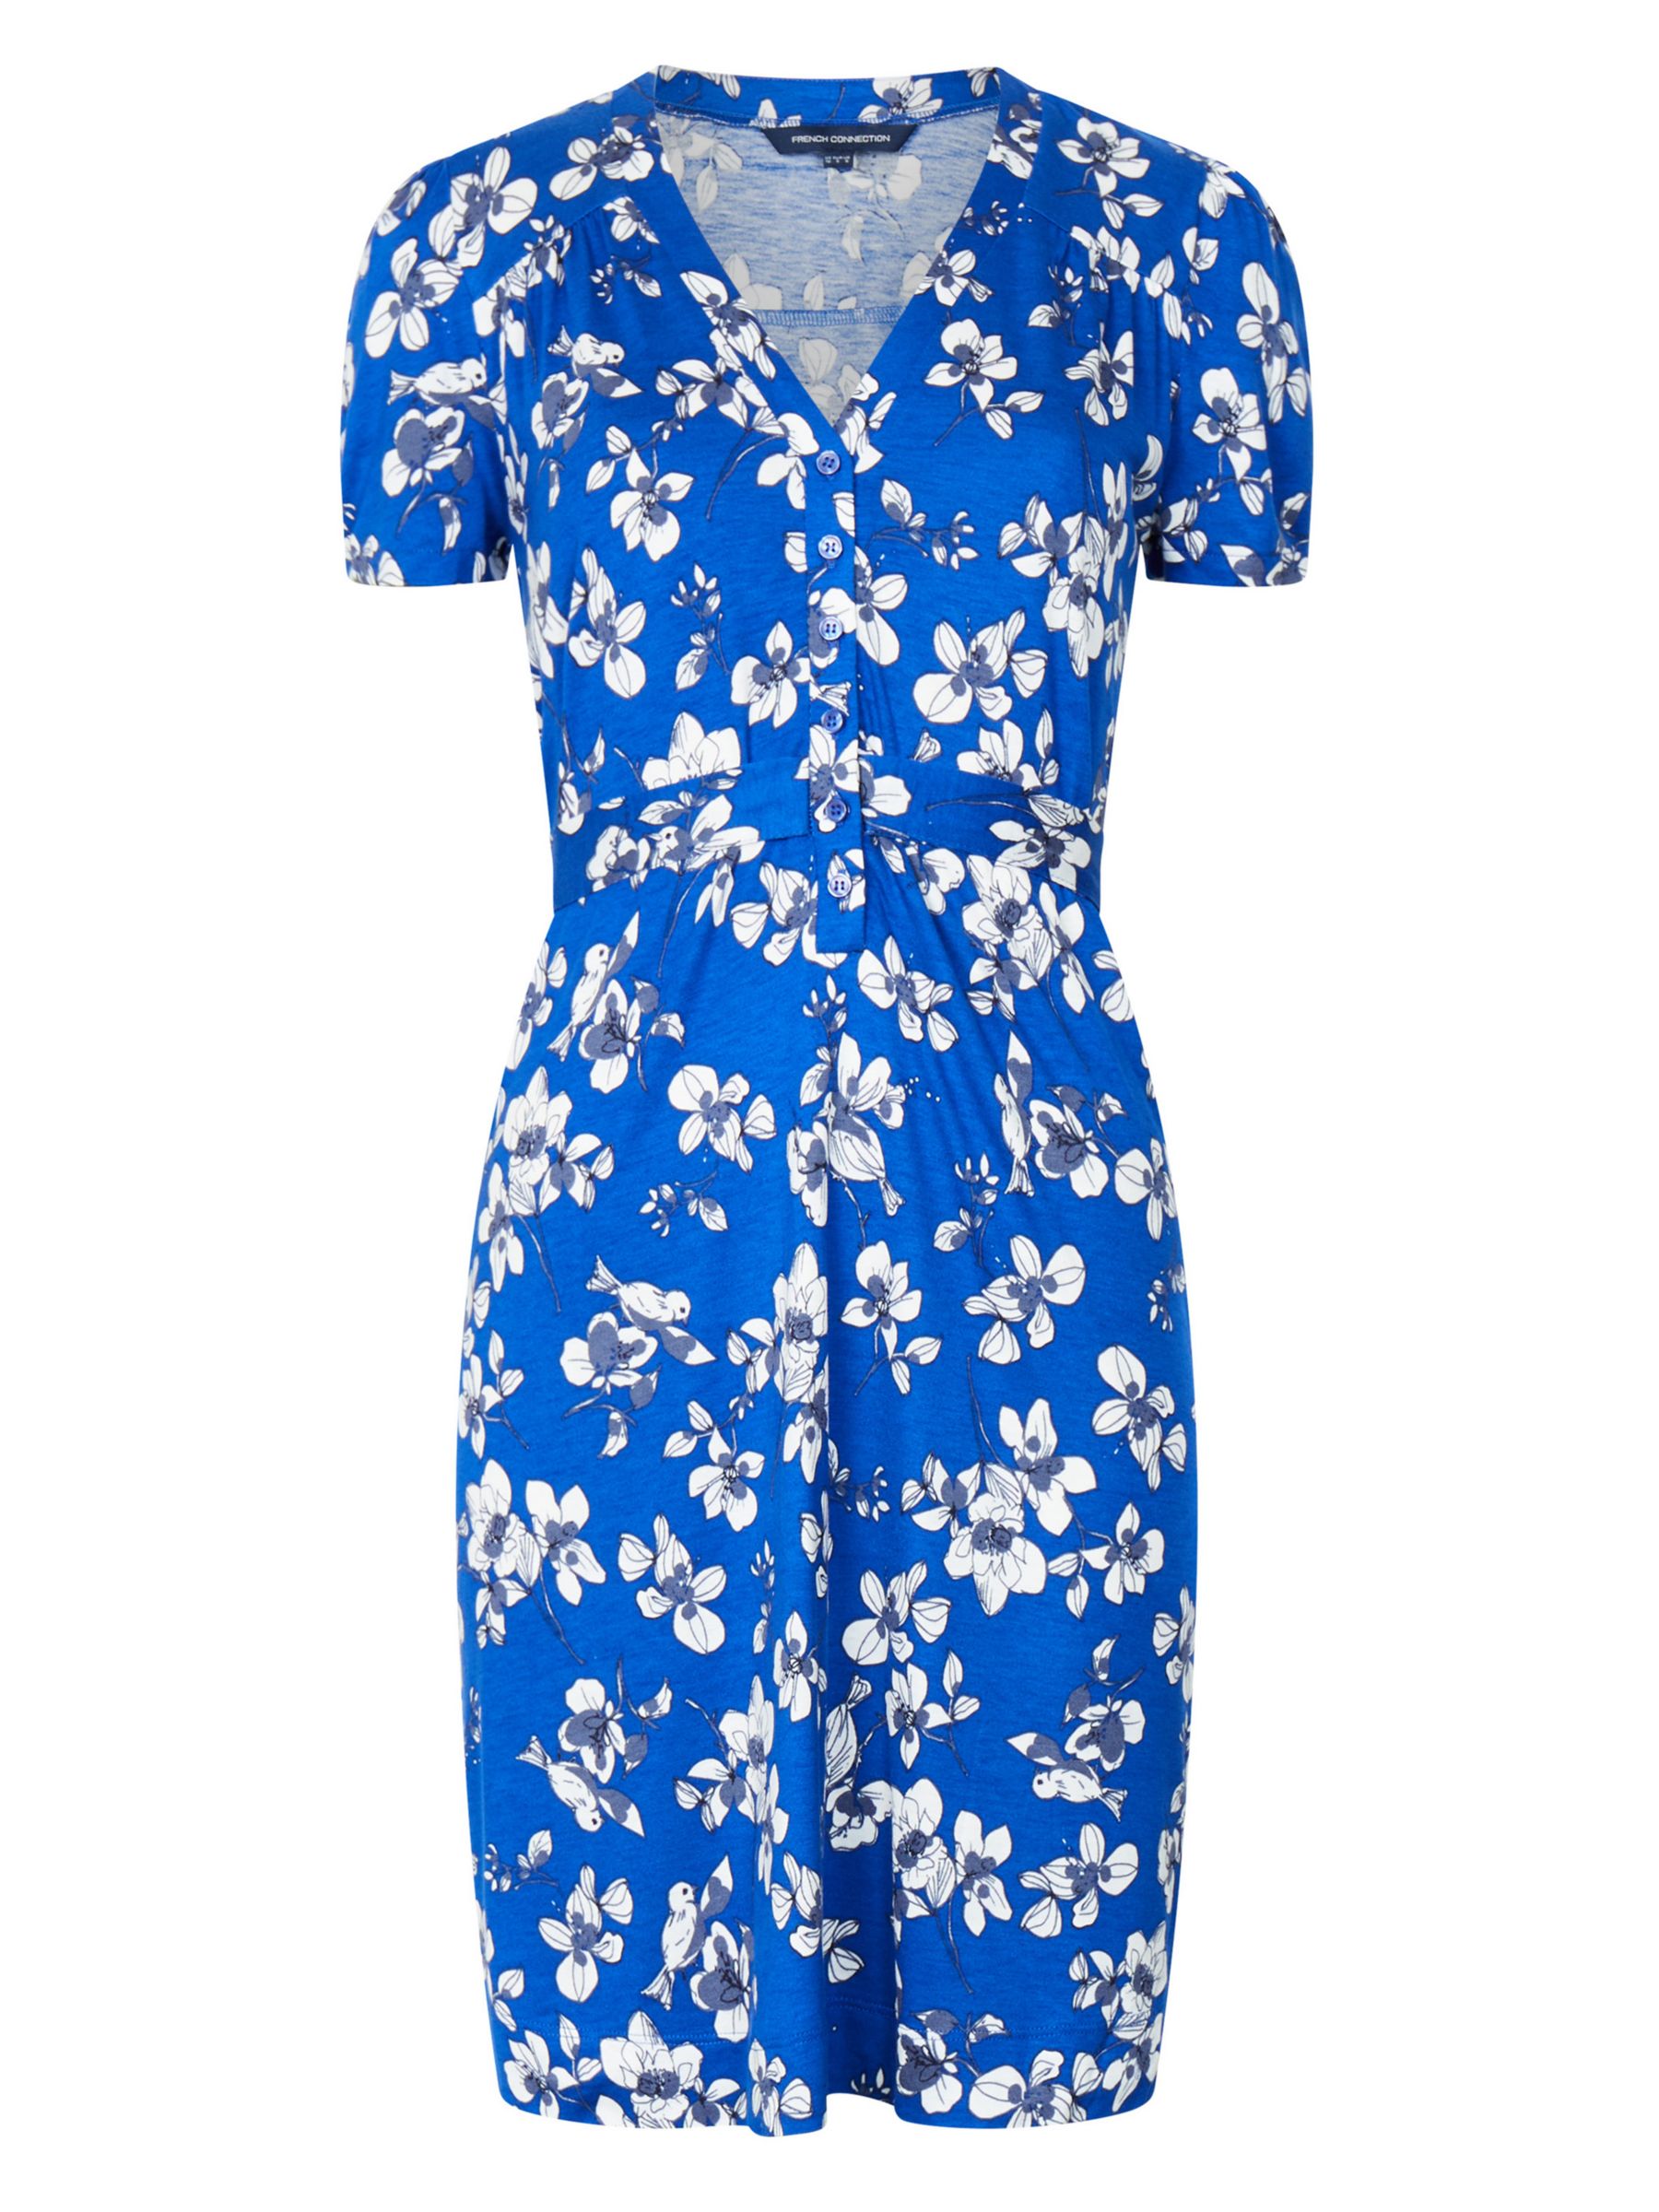 French Connection Floral Print Mini Dress, Blue at John Lewis & Partners